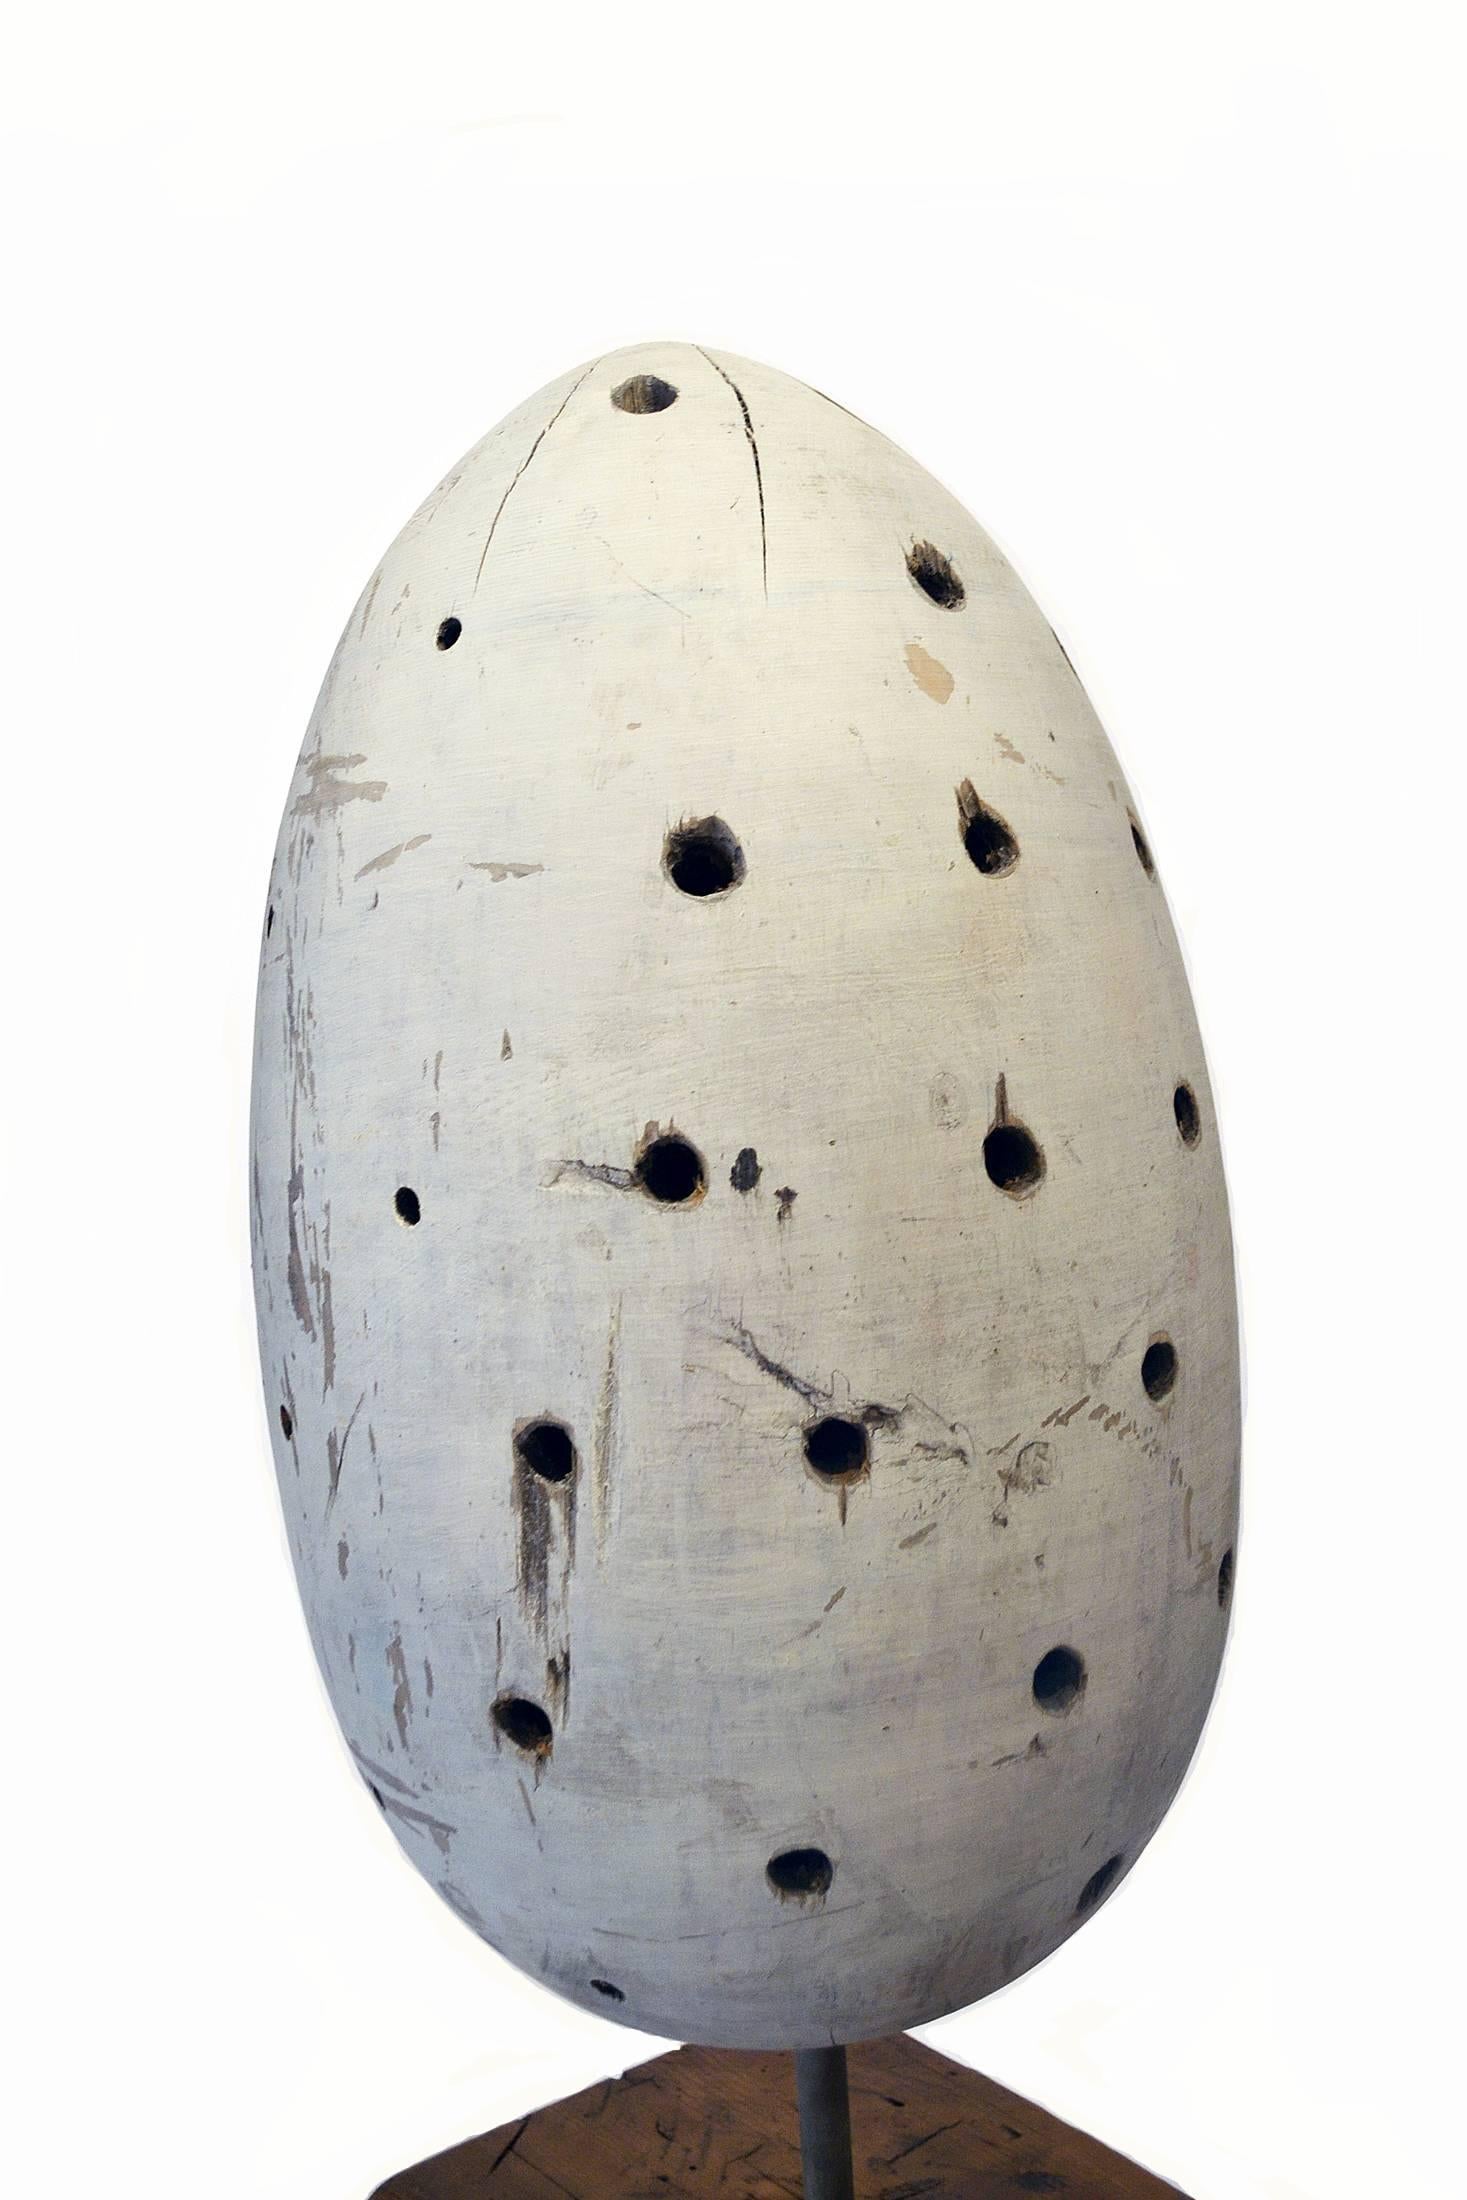 An exceptional carved wood sculpture in the form of a large egg, significantly dotted with holes and painted in a white wash. The sculpture sits on a metal rod that is mounted into a wood base. A striking work of art. Artist unknown.